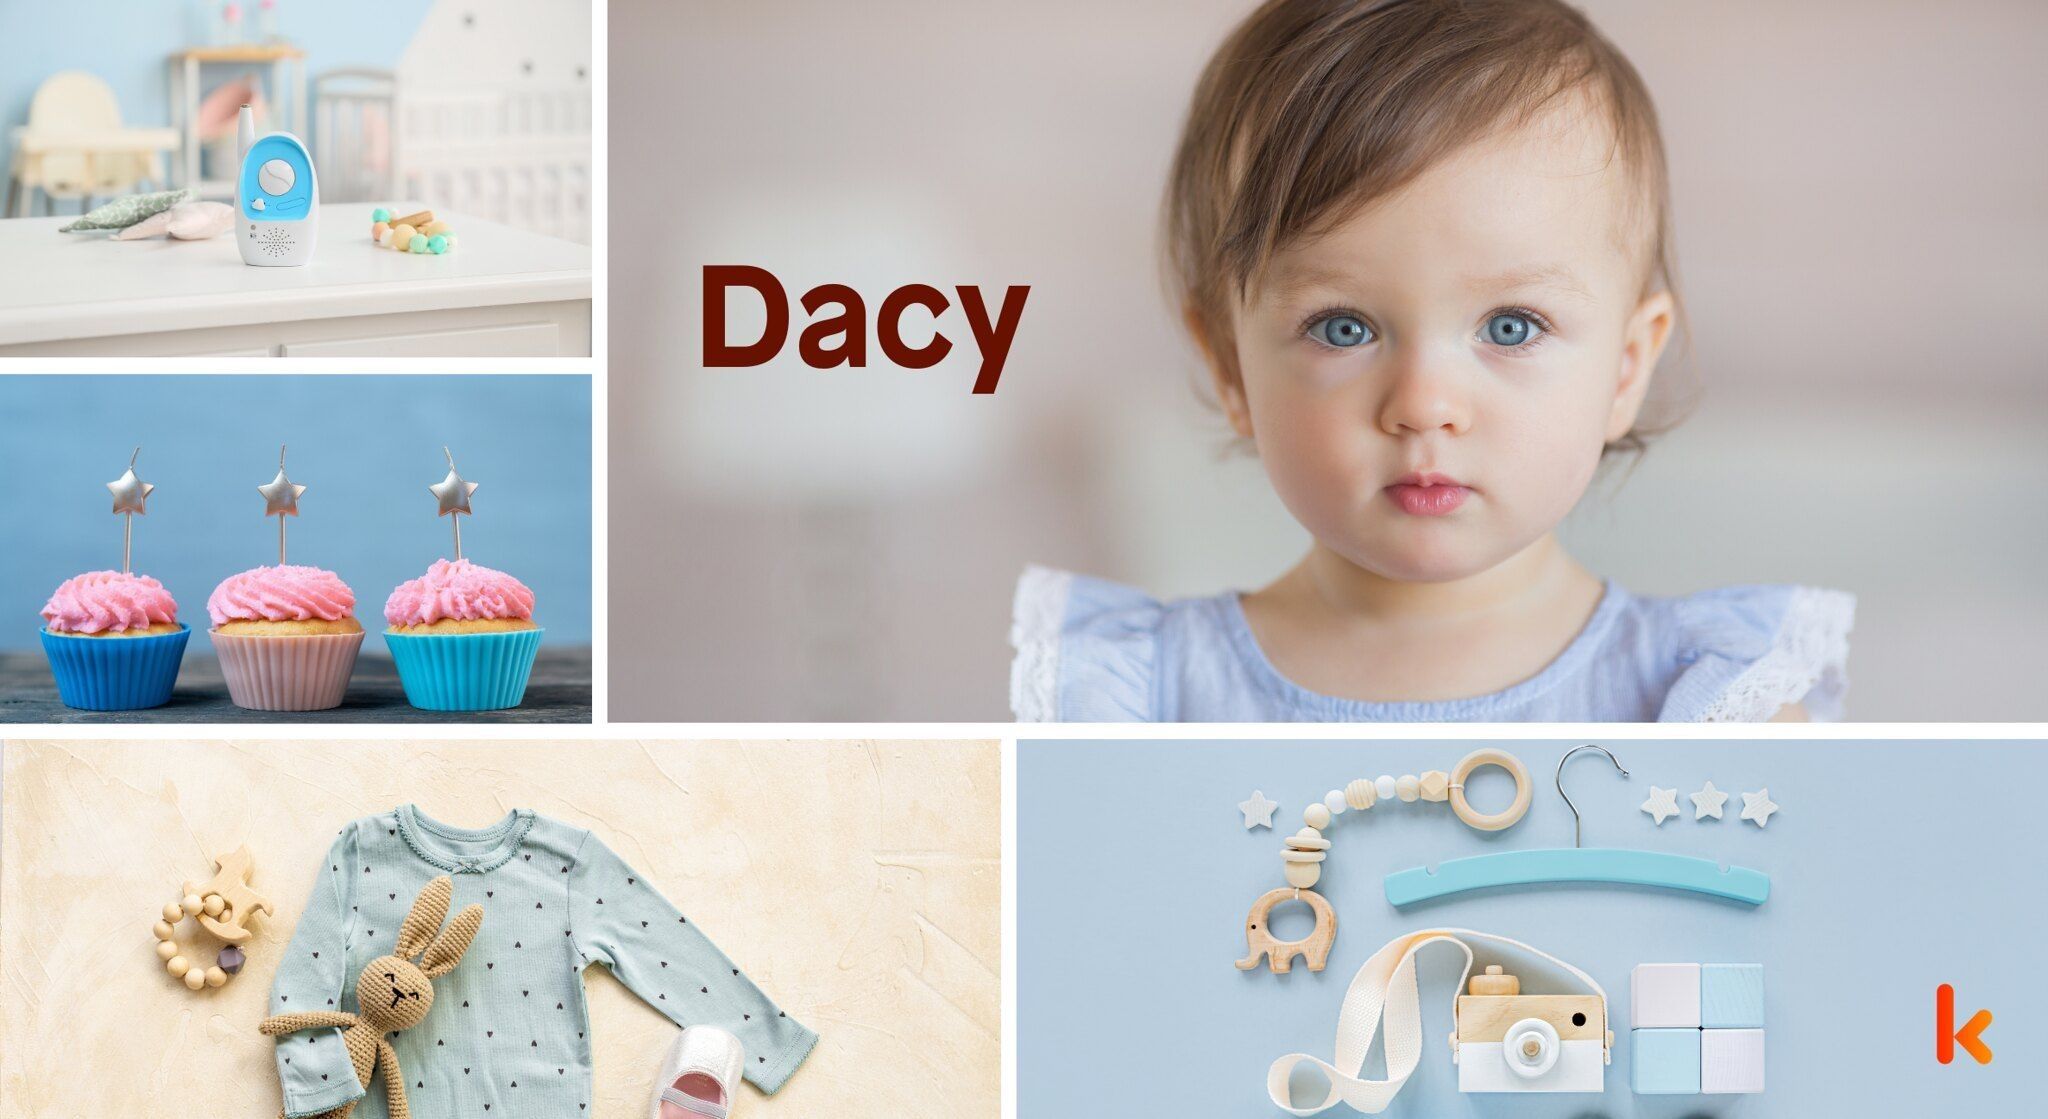 Meaning of the name Dacy